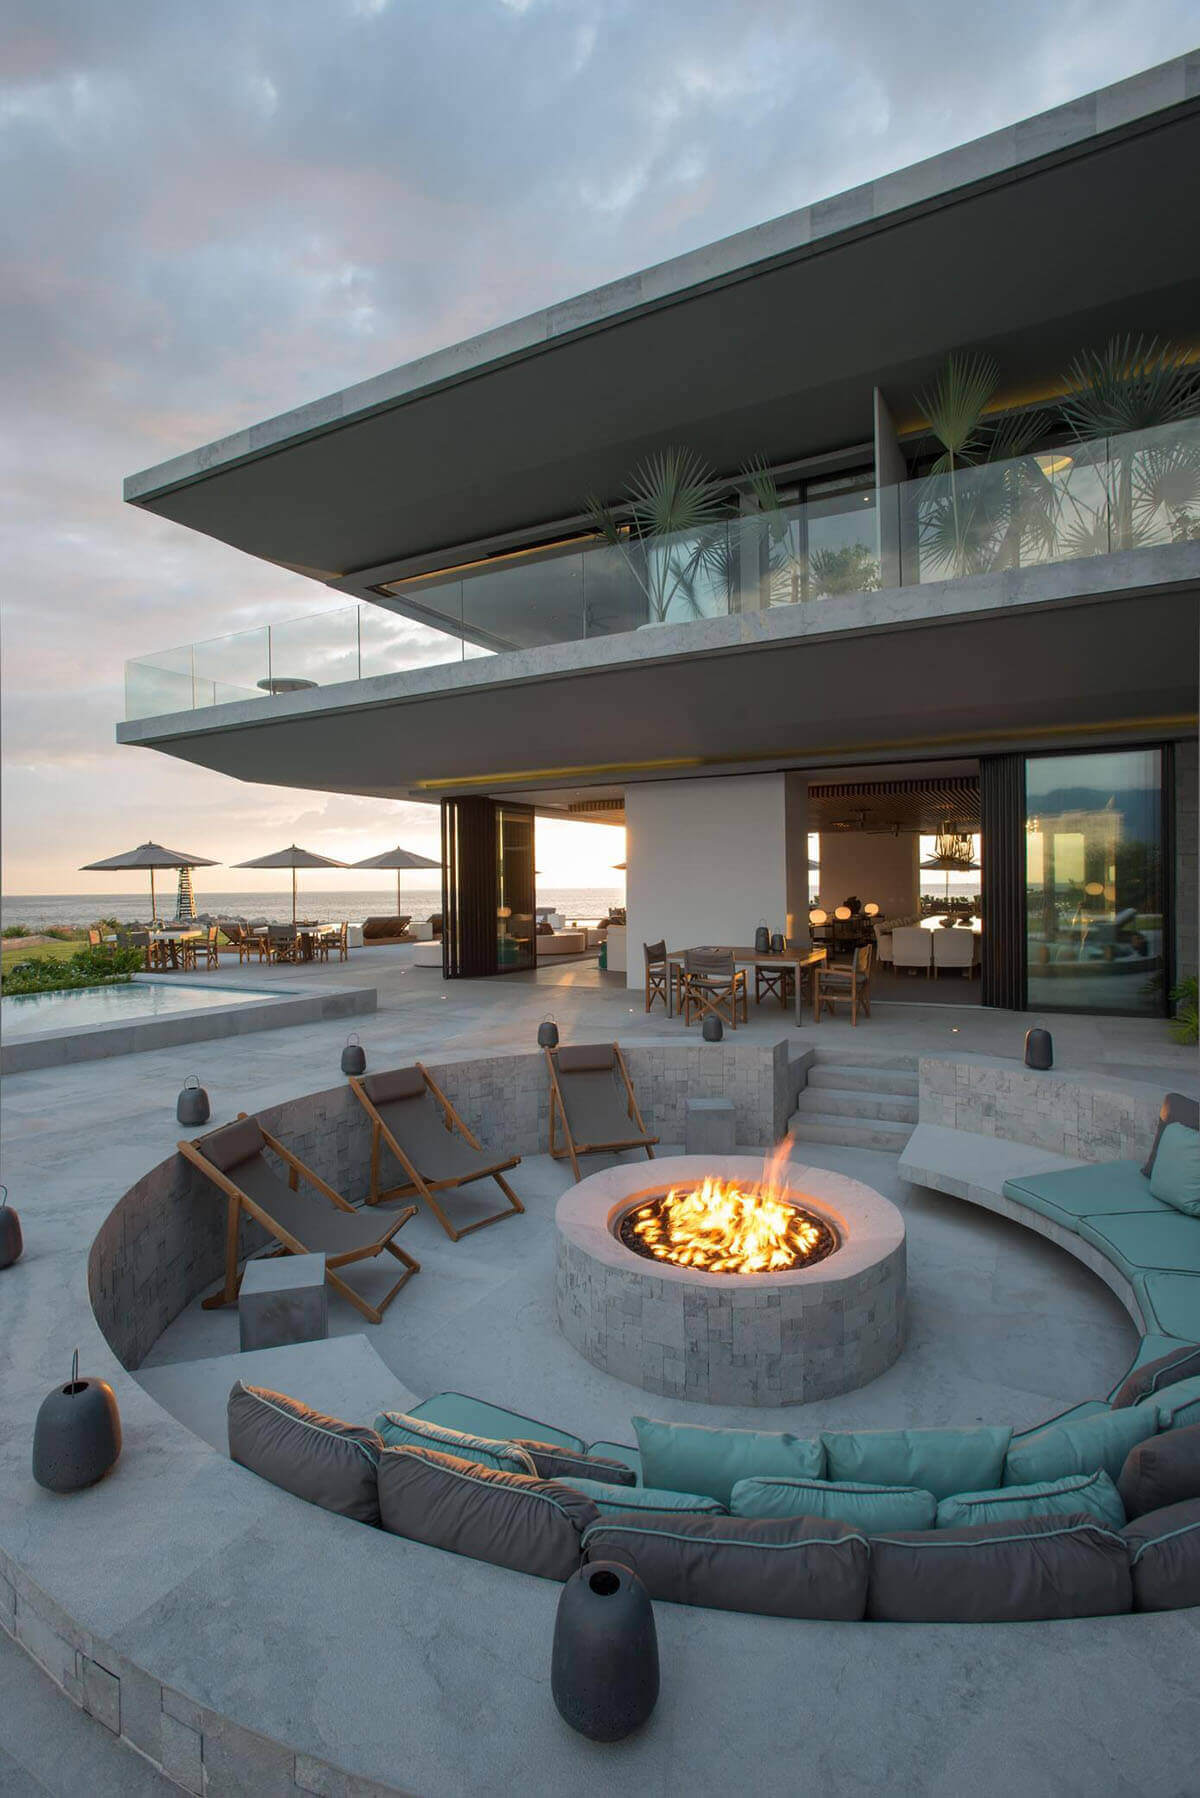 A Sunken Concrete Firepit with Comfortable Seating | Awesome Firepit Area Ideas For Your Outdoor Activities